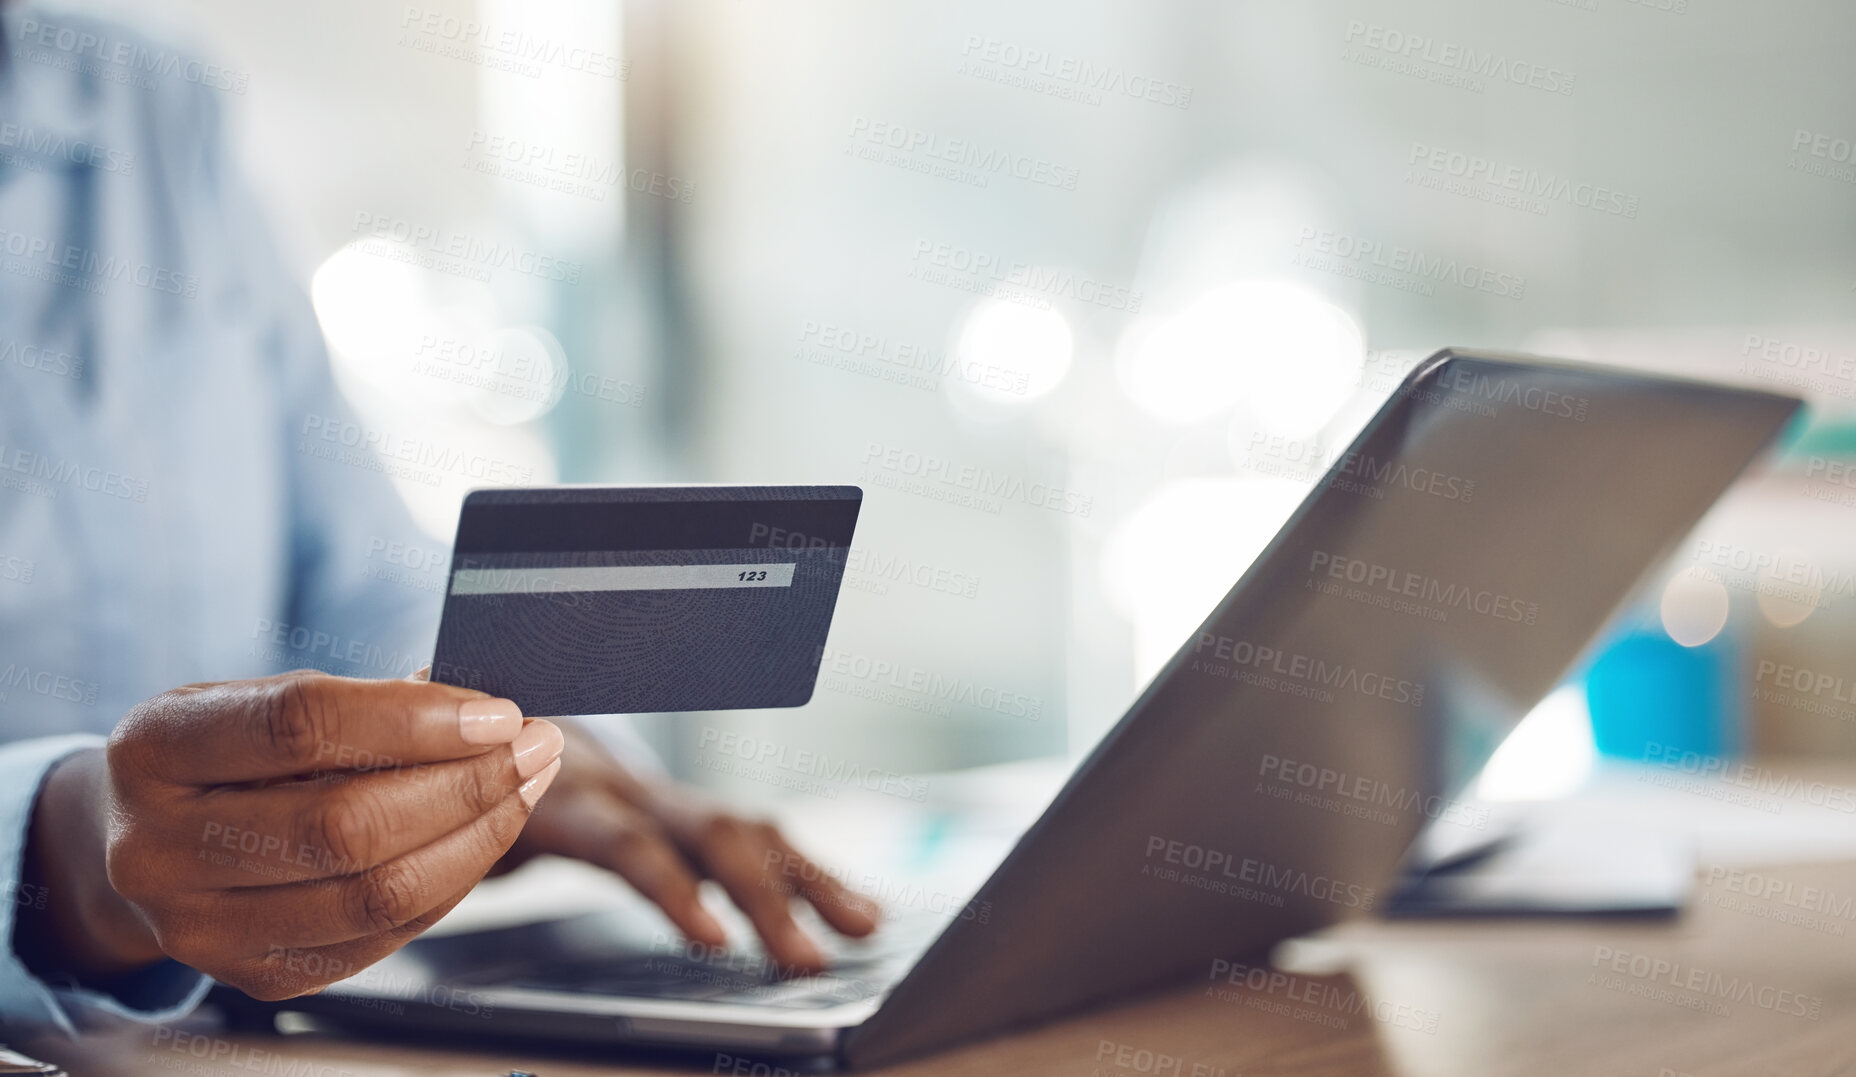 Buy stock photo Ecommerce, online shopping and credit card payment on a laptop via the internet for easy and fast digital cash exchange. African persons hands typing banking information on fintech to transfer money